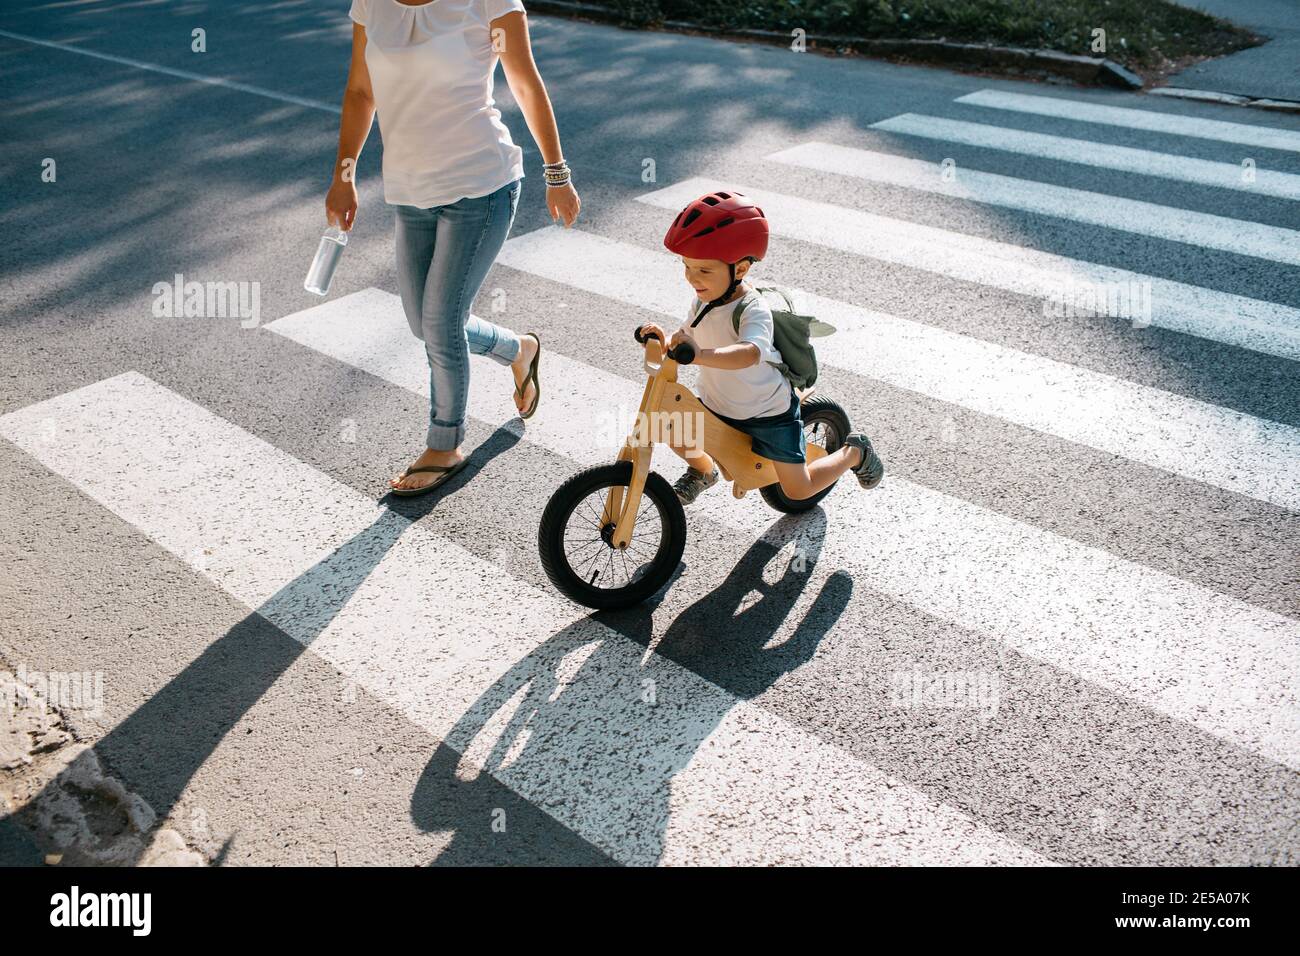 Young boy on bike crossing road at zebra crossing. Stock Photo